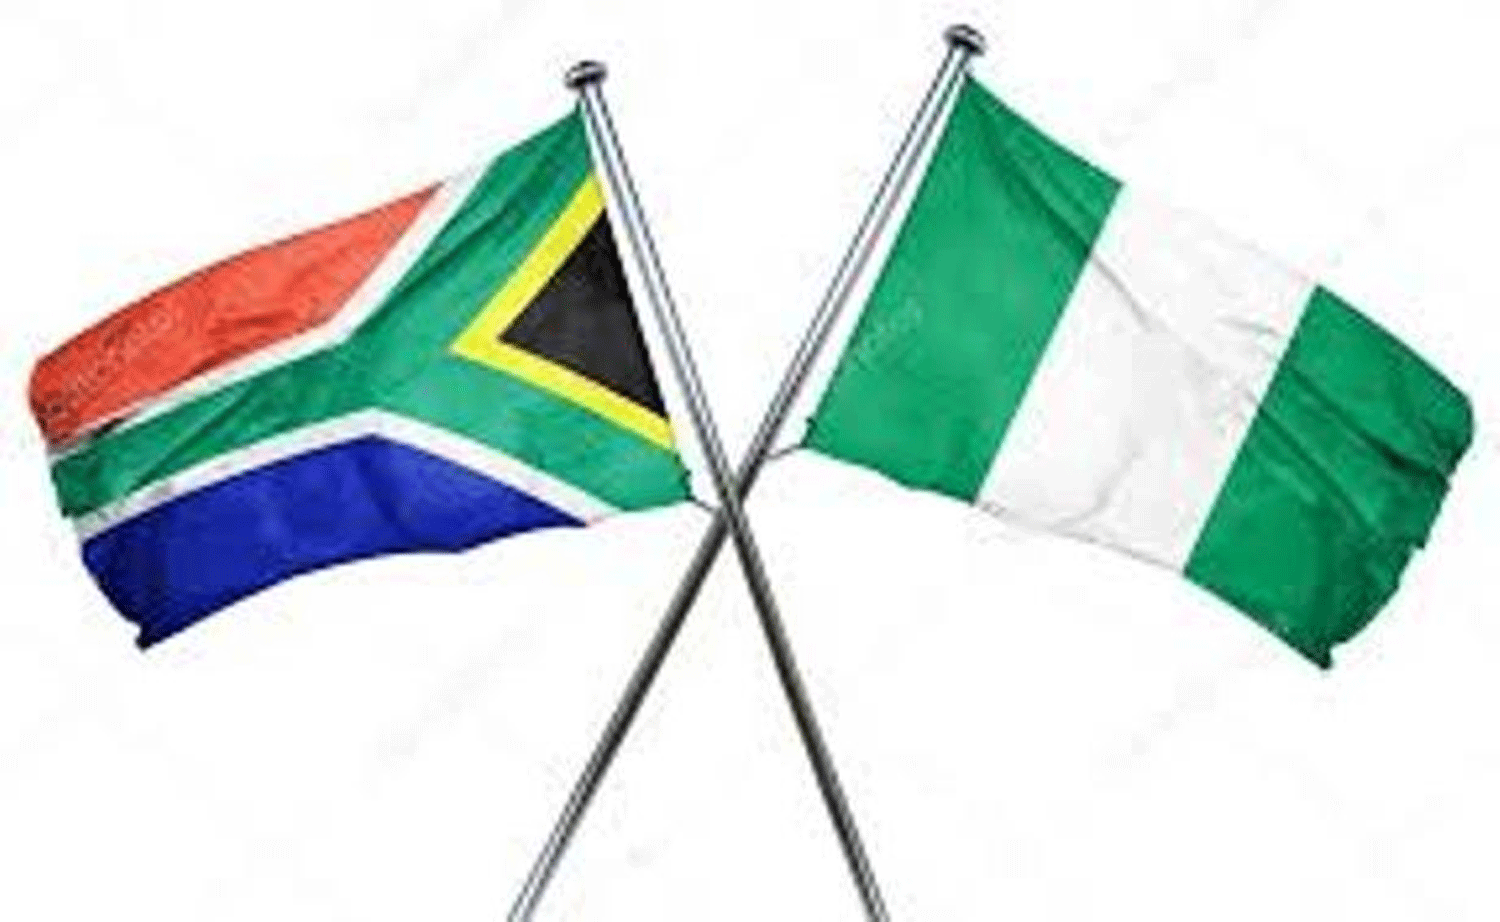 S/Africa, Nigeria committed to strengthening bilateral ties